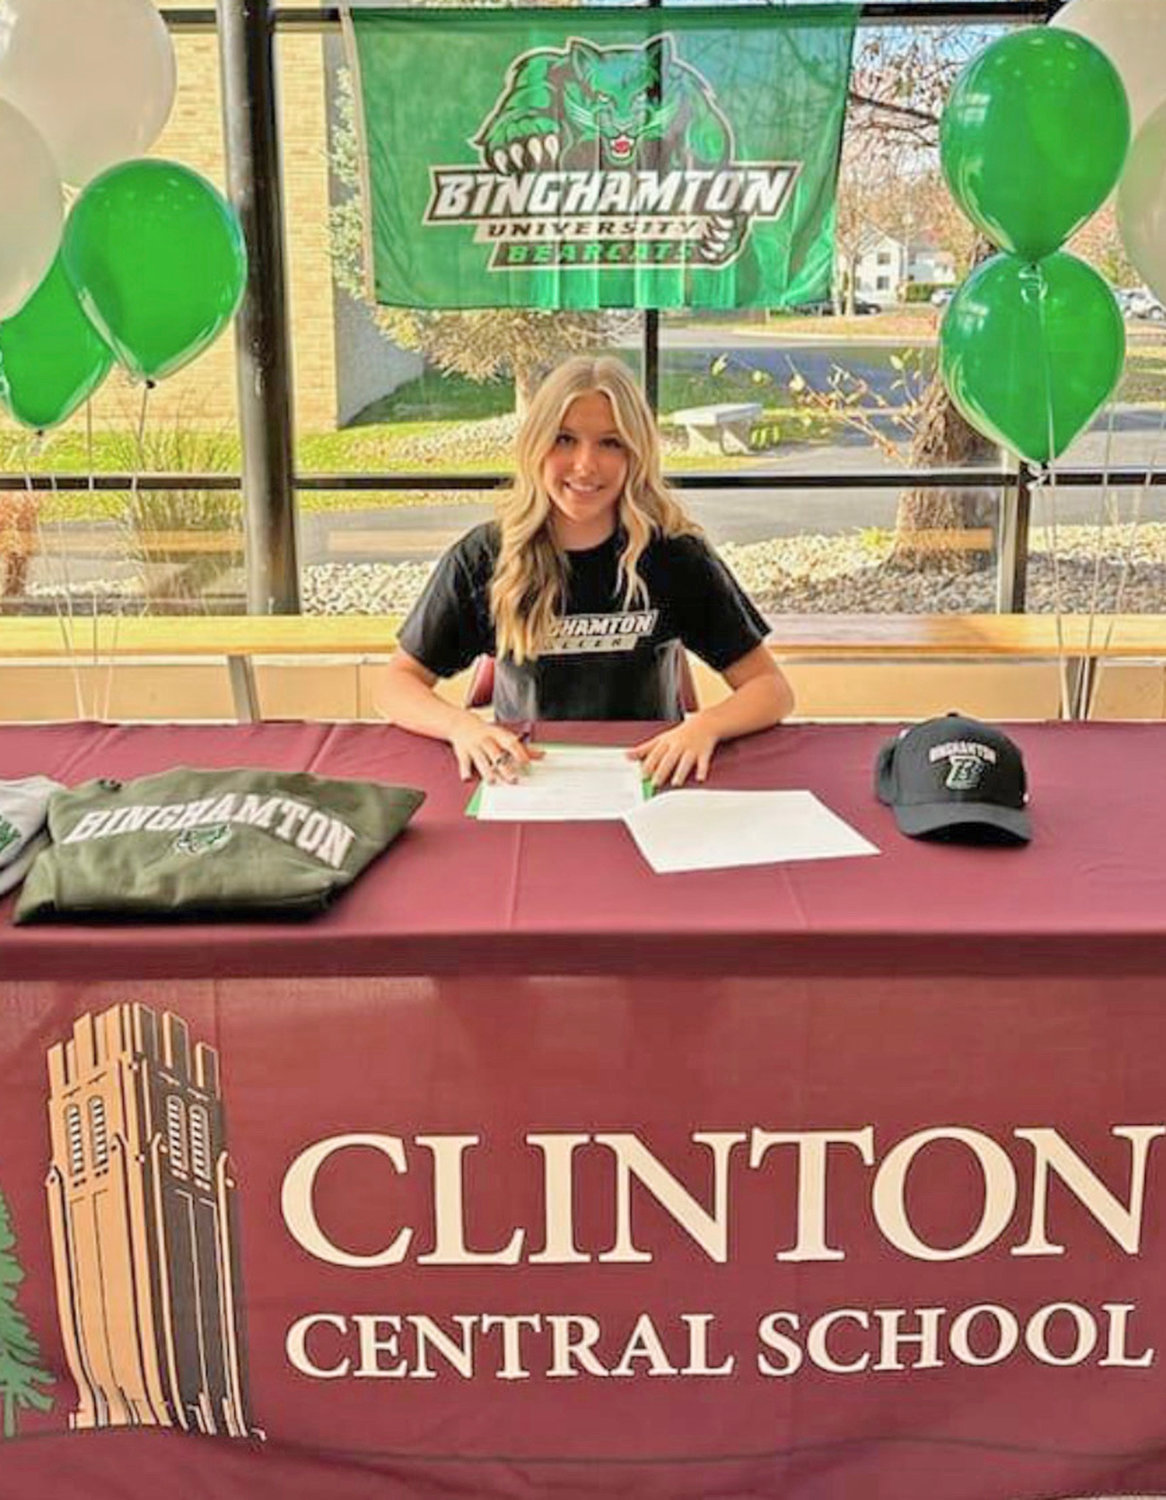 LUKE TO PLAY AT BINGHAMTON — Clinton senior Paige Luke has signed a National Letter of Intent to play Division I soccer at Binghamton University. Luke led the Warriors with 14 goals this season and also added seven assists. In four years of varsity soccer for Clinton, she totaled 33 goals and 21 assists. She was a Section III Class B all-star, first team all-league in the Center State Conference and was the team’s offensive MVP.